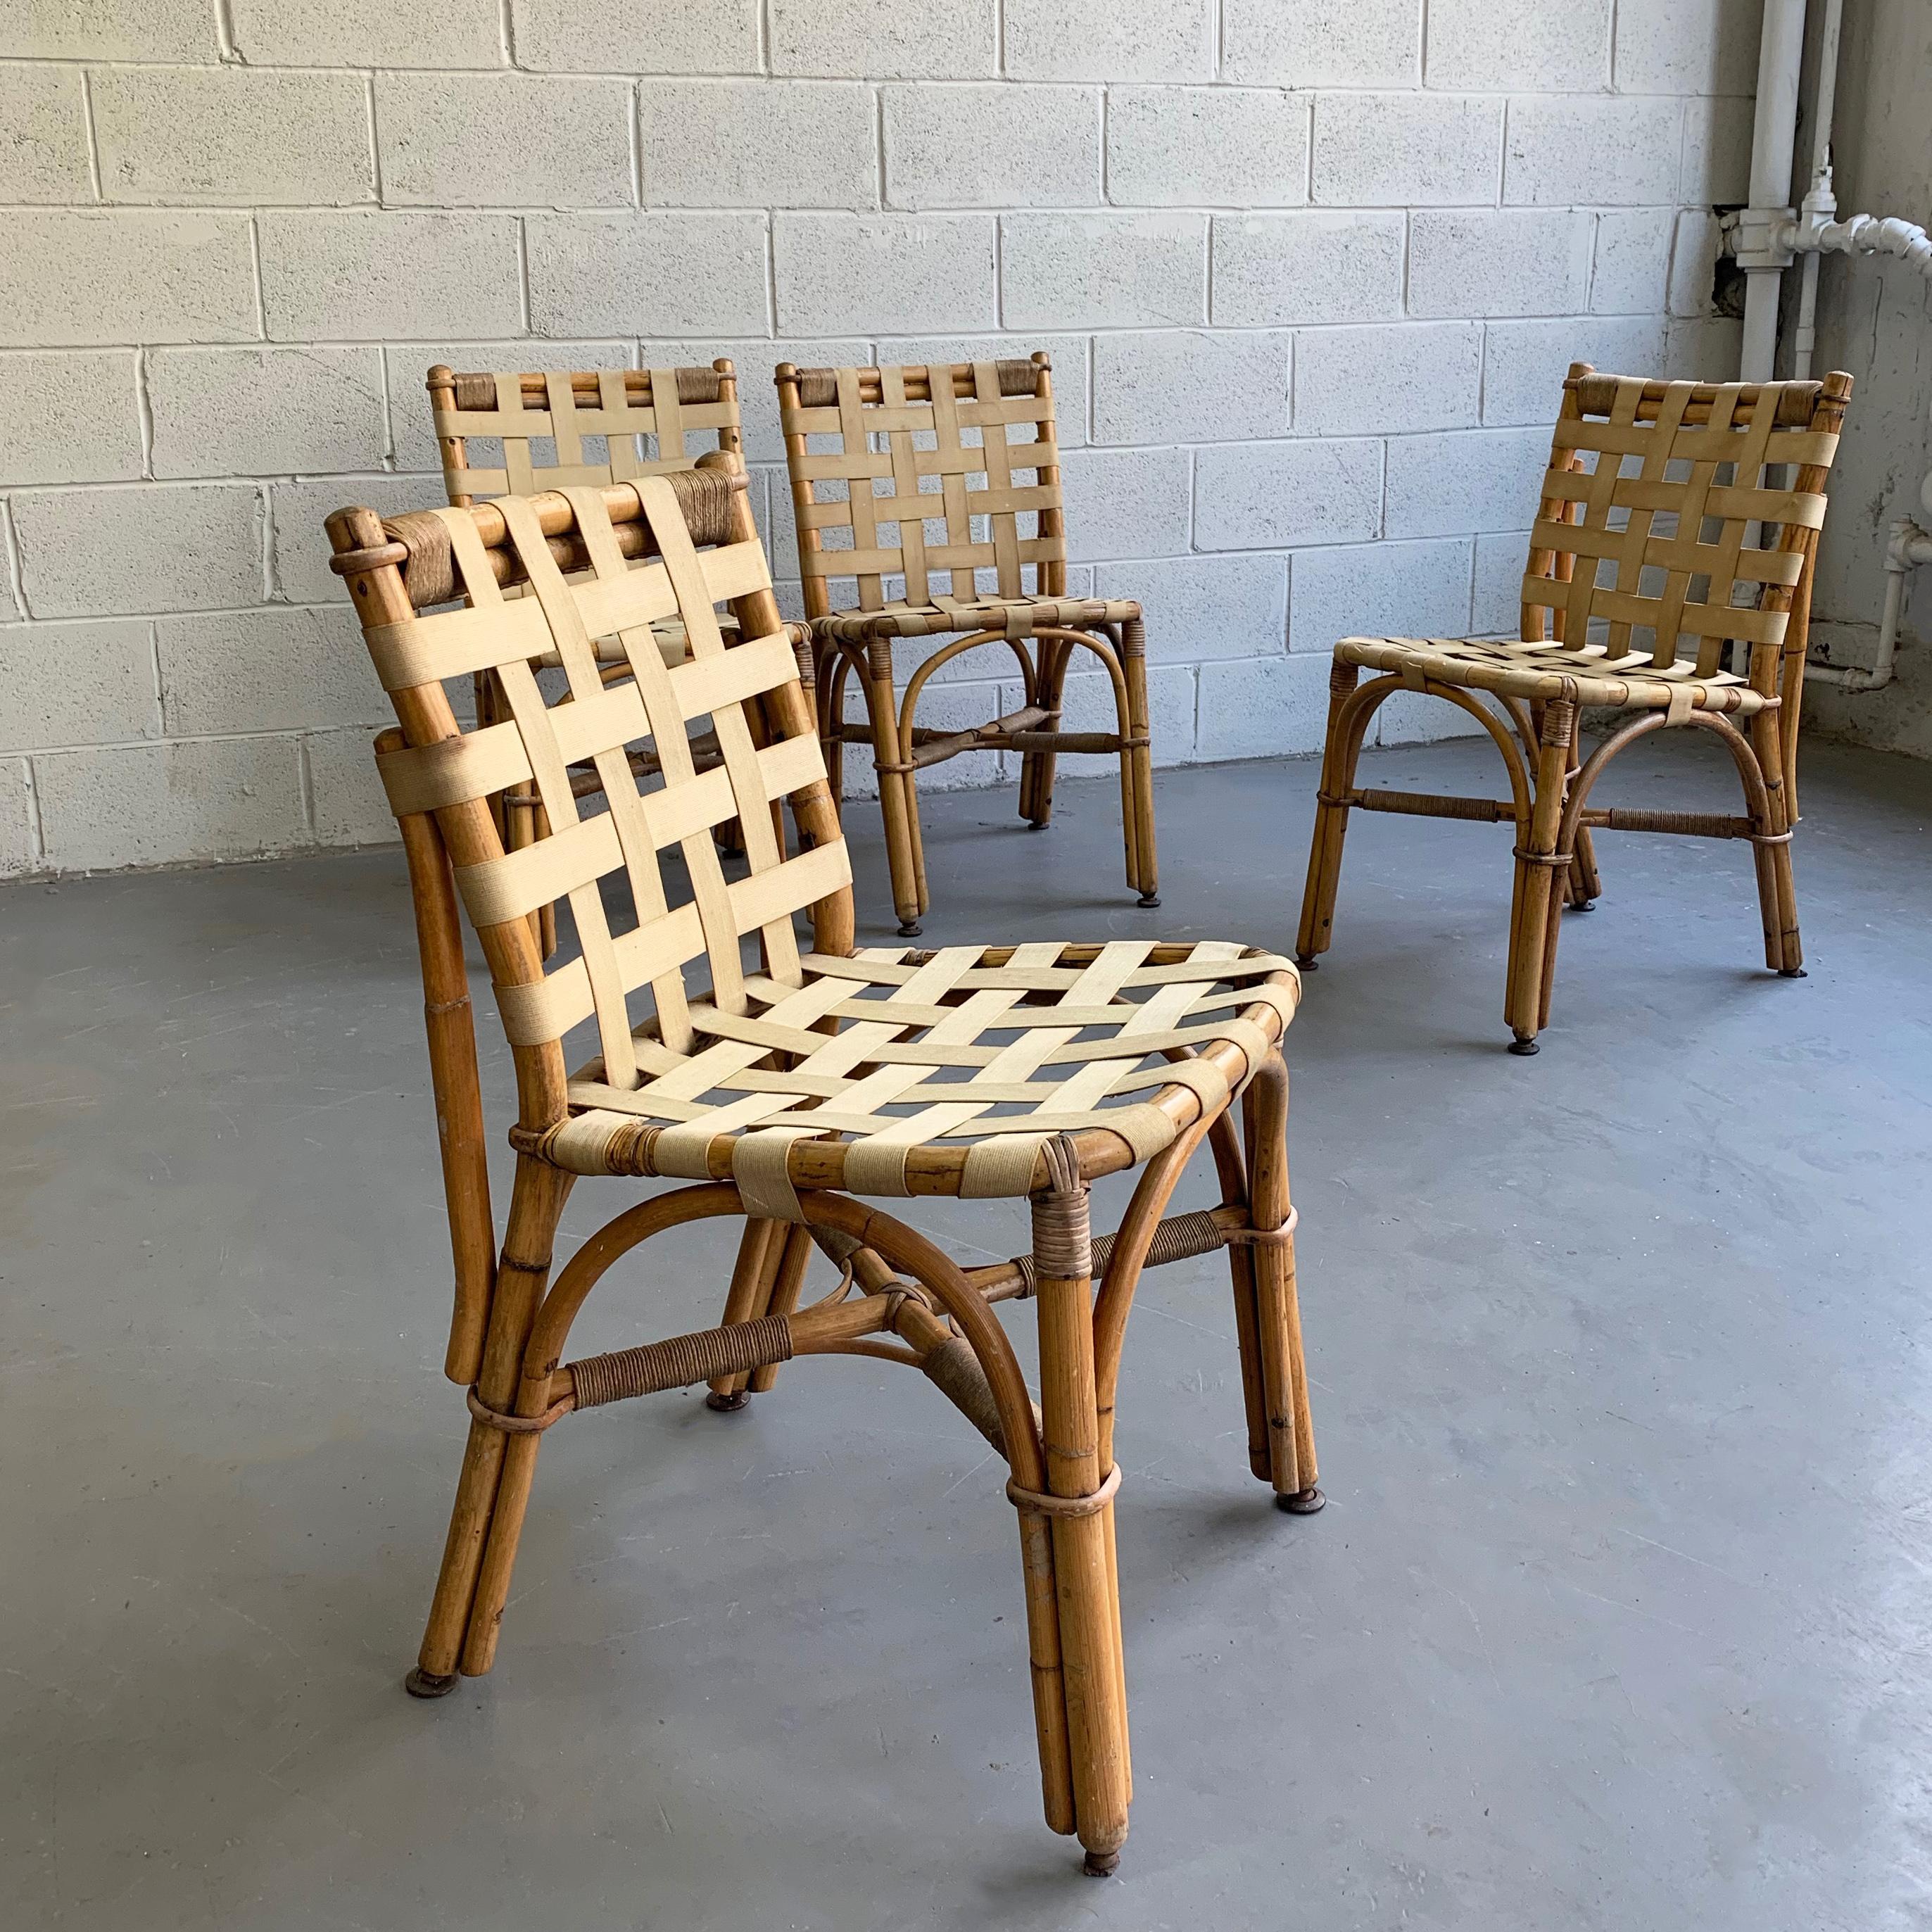 Rustic Abercrombie & Fitch Bamboo Chair Set